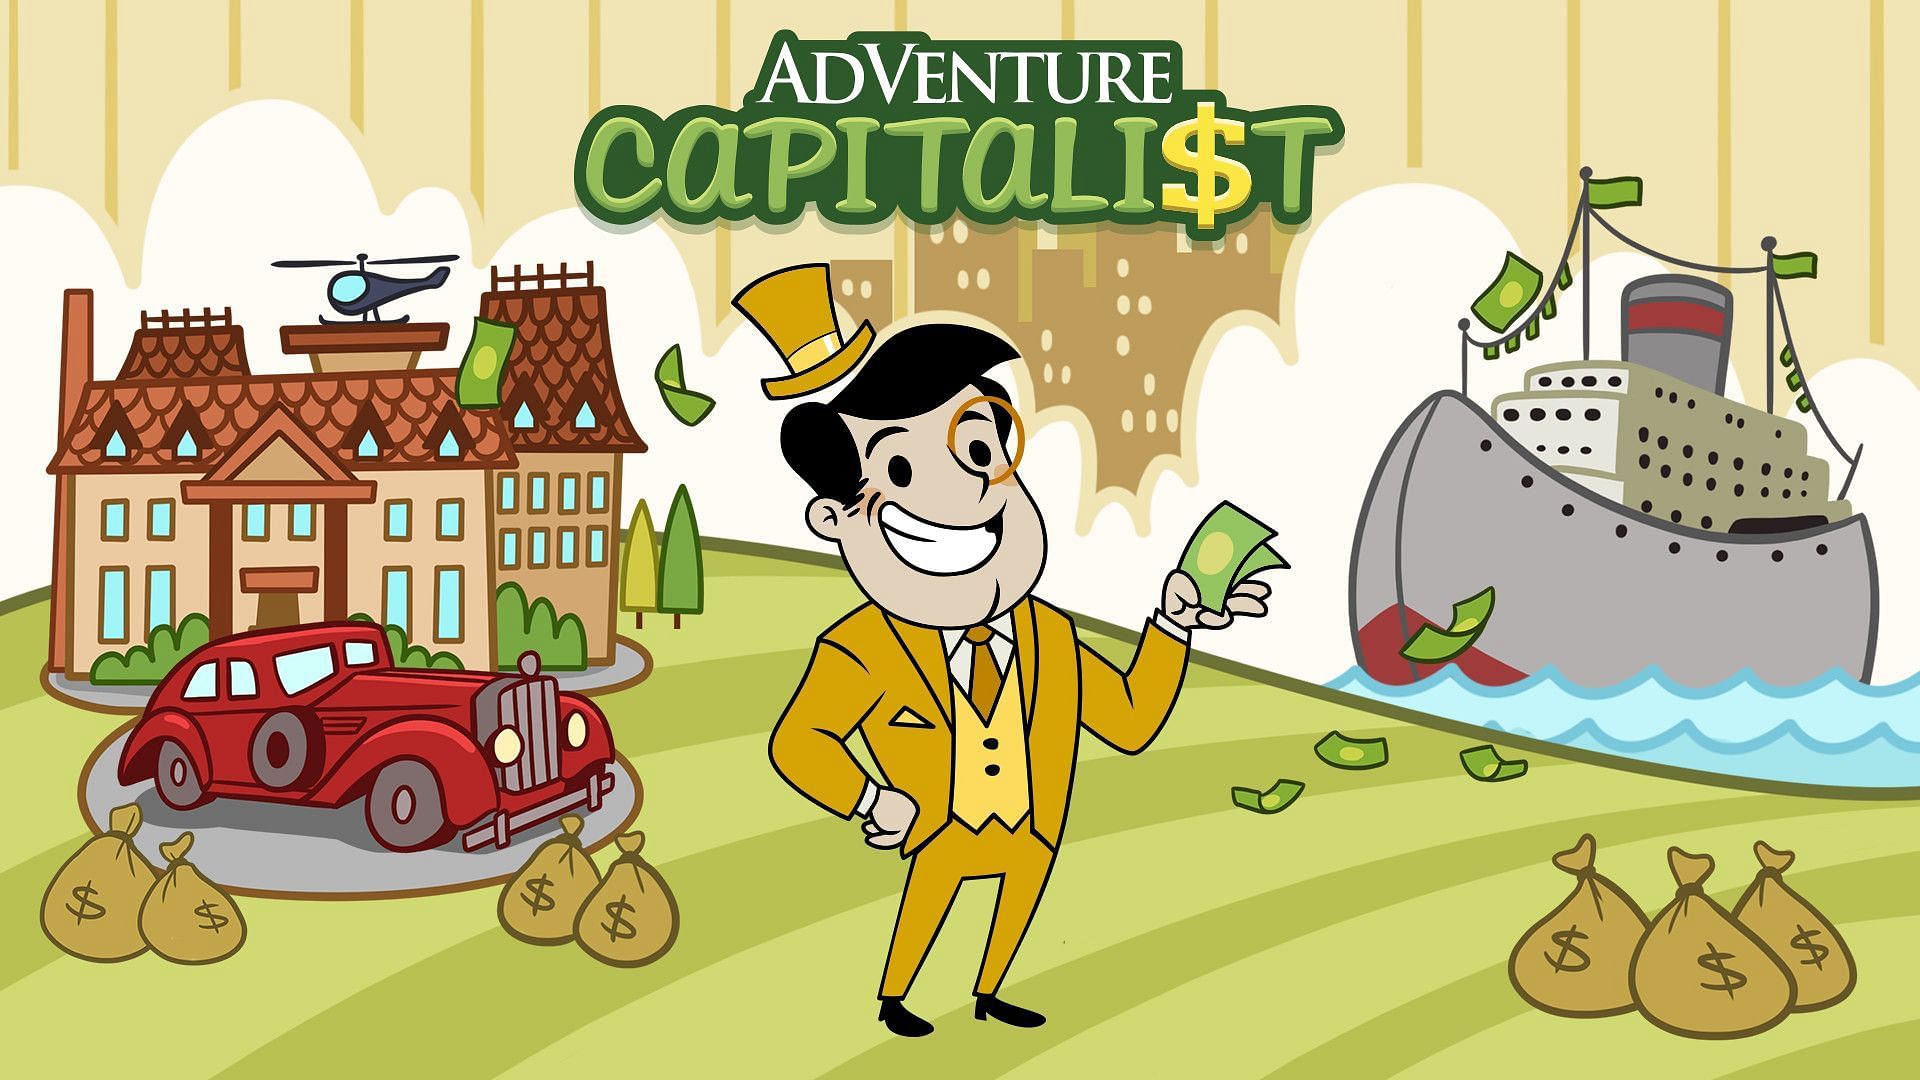 Players can learn about business in a fun way with AdVenture Capitalist (Image via Hyper Hippo Games)